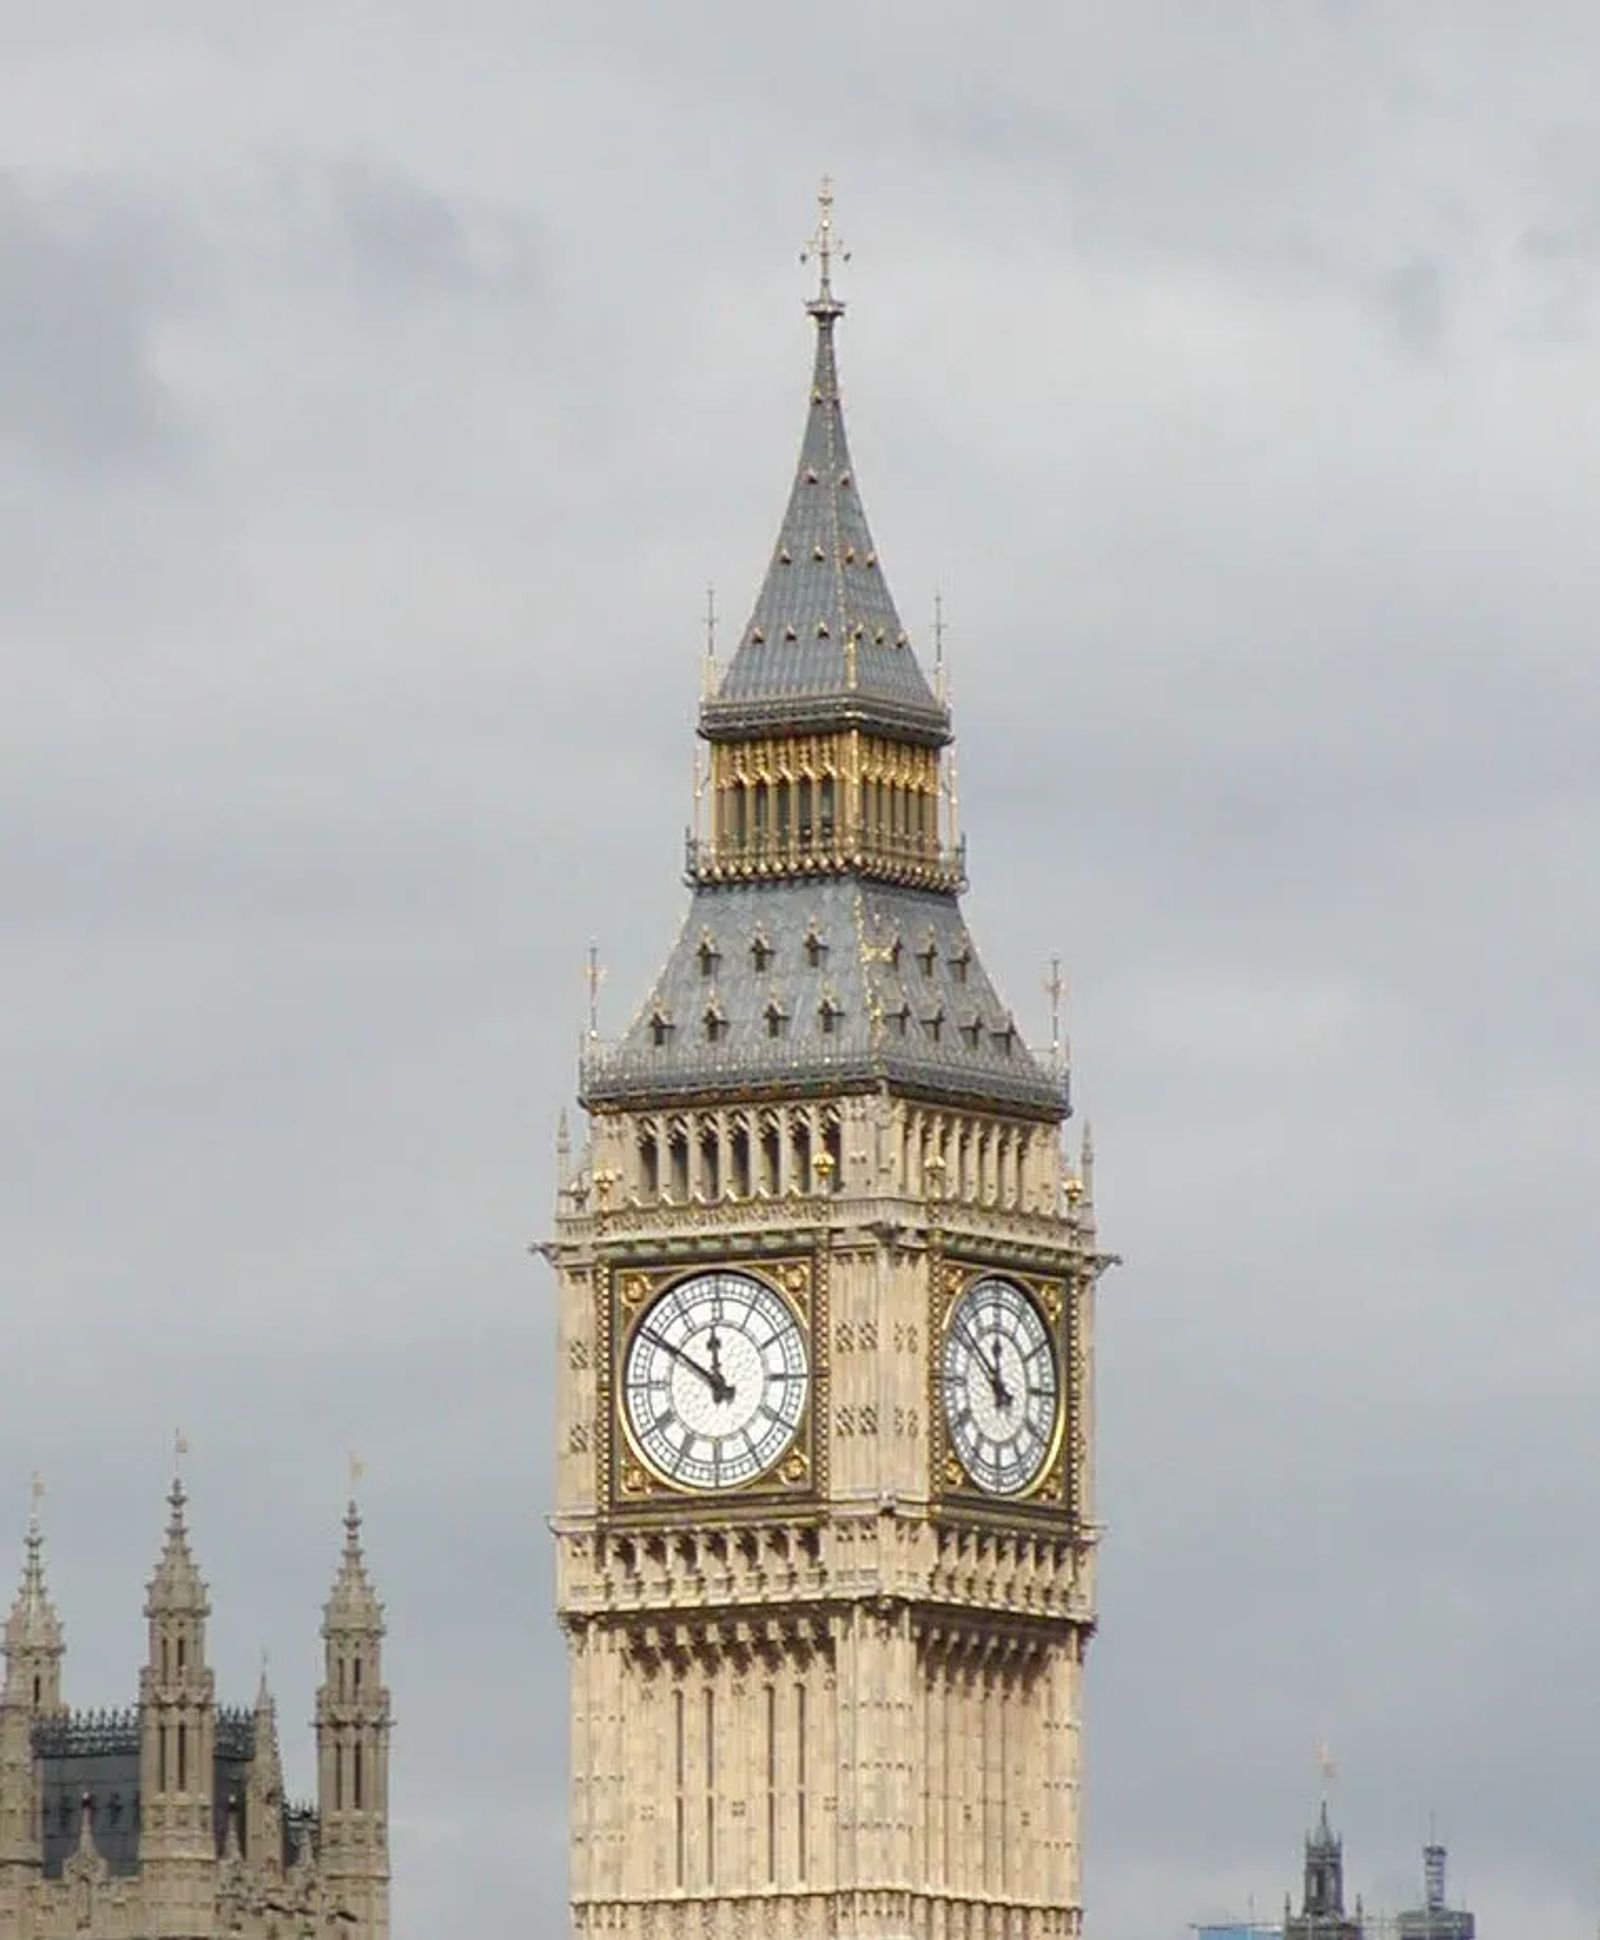 Photo of the Big Ben clock tower in London, England